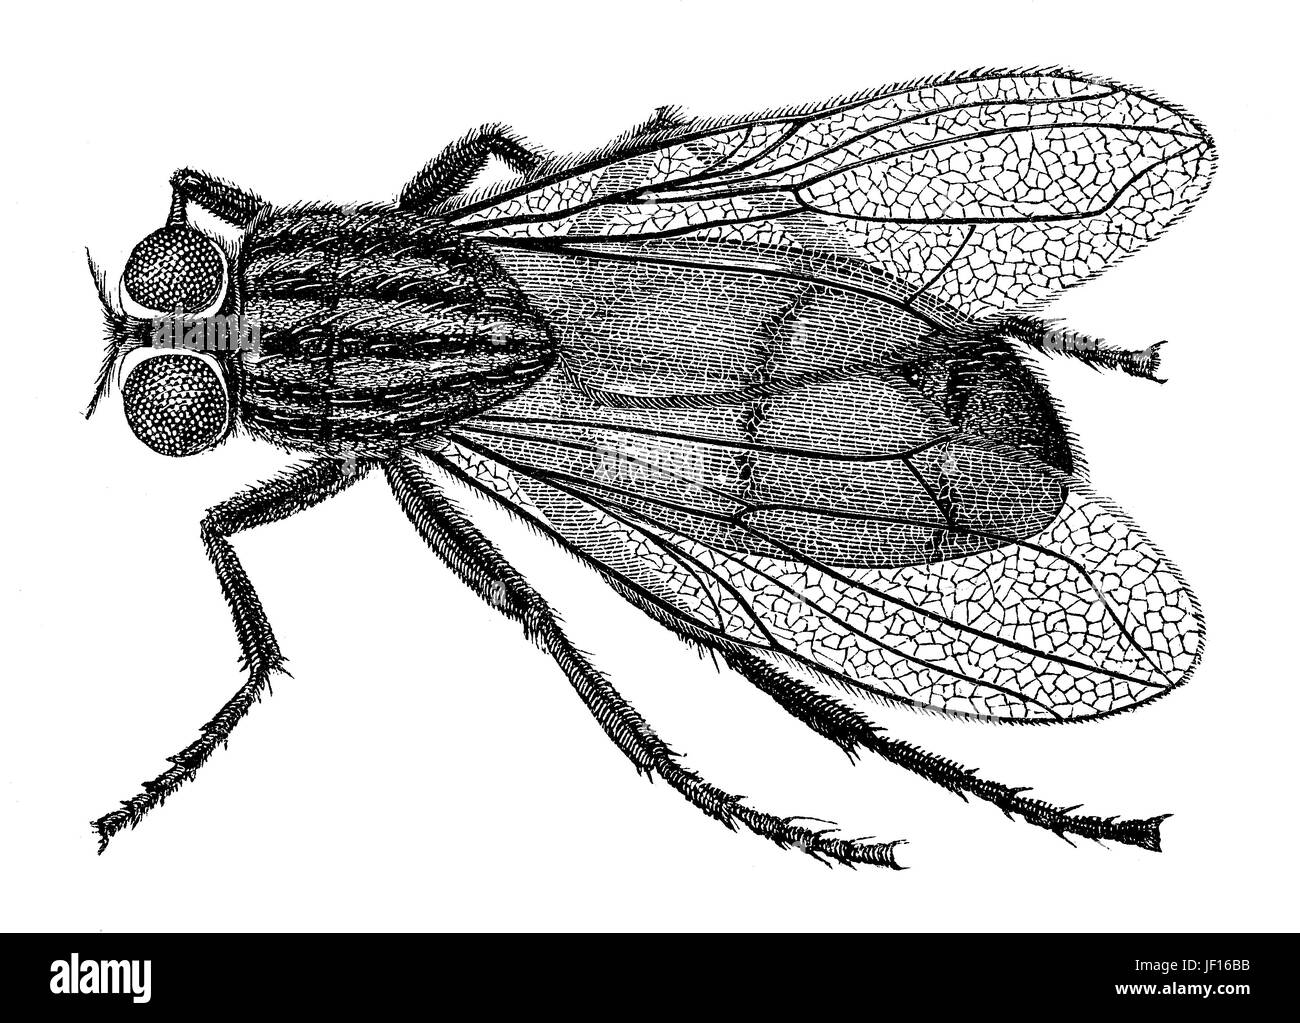 Historical illustration of a housefly, Musca domestica, Digital improved reproduction from an original print from 1888 Stock Photo